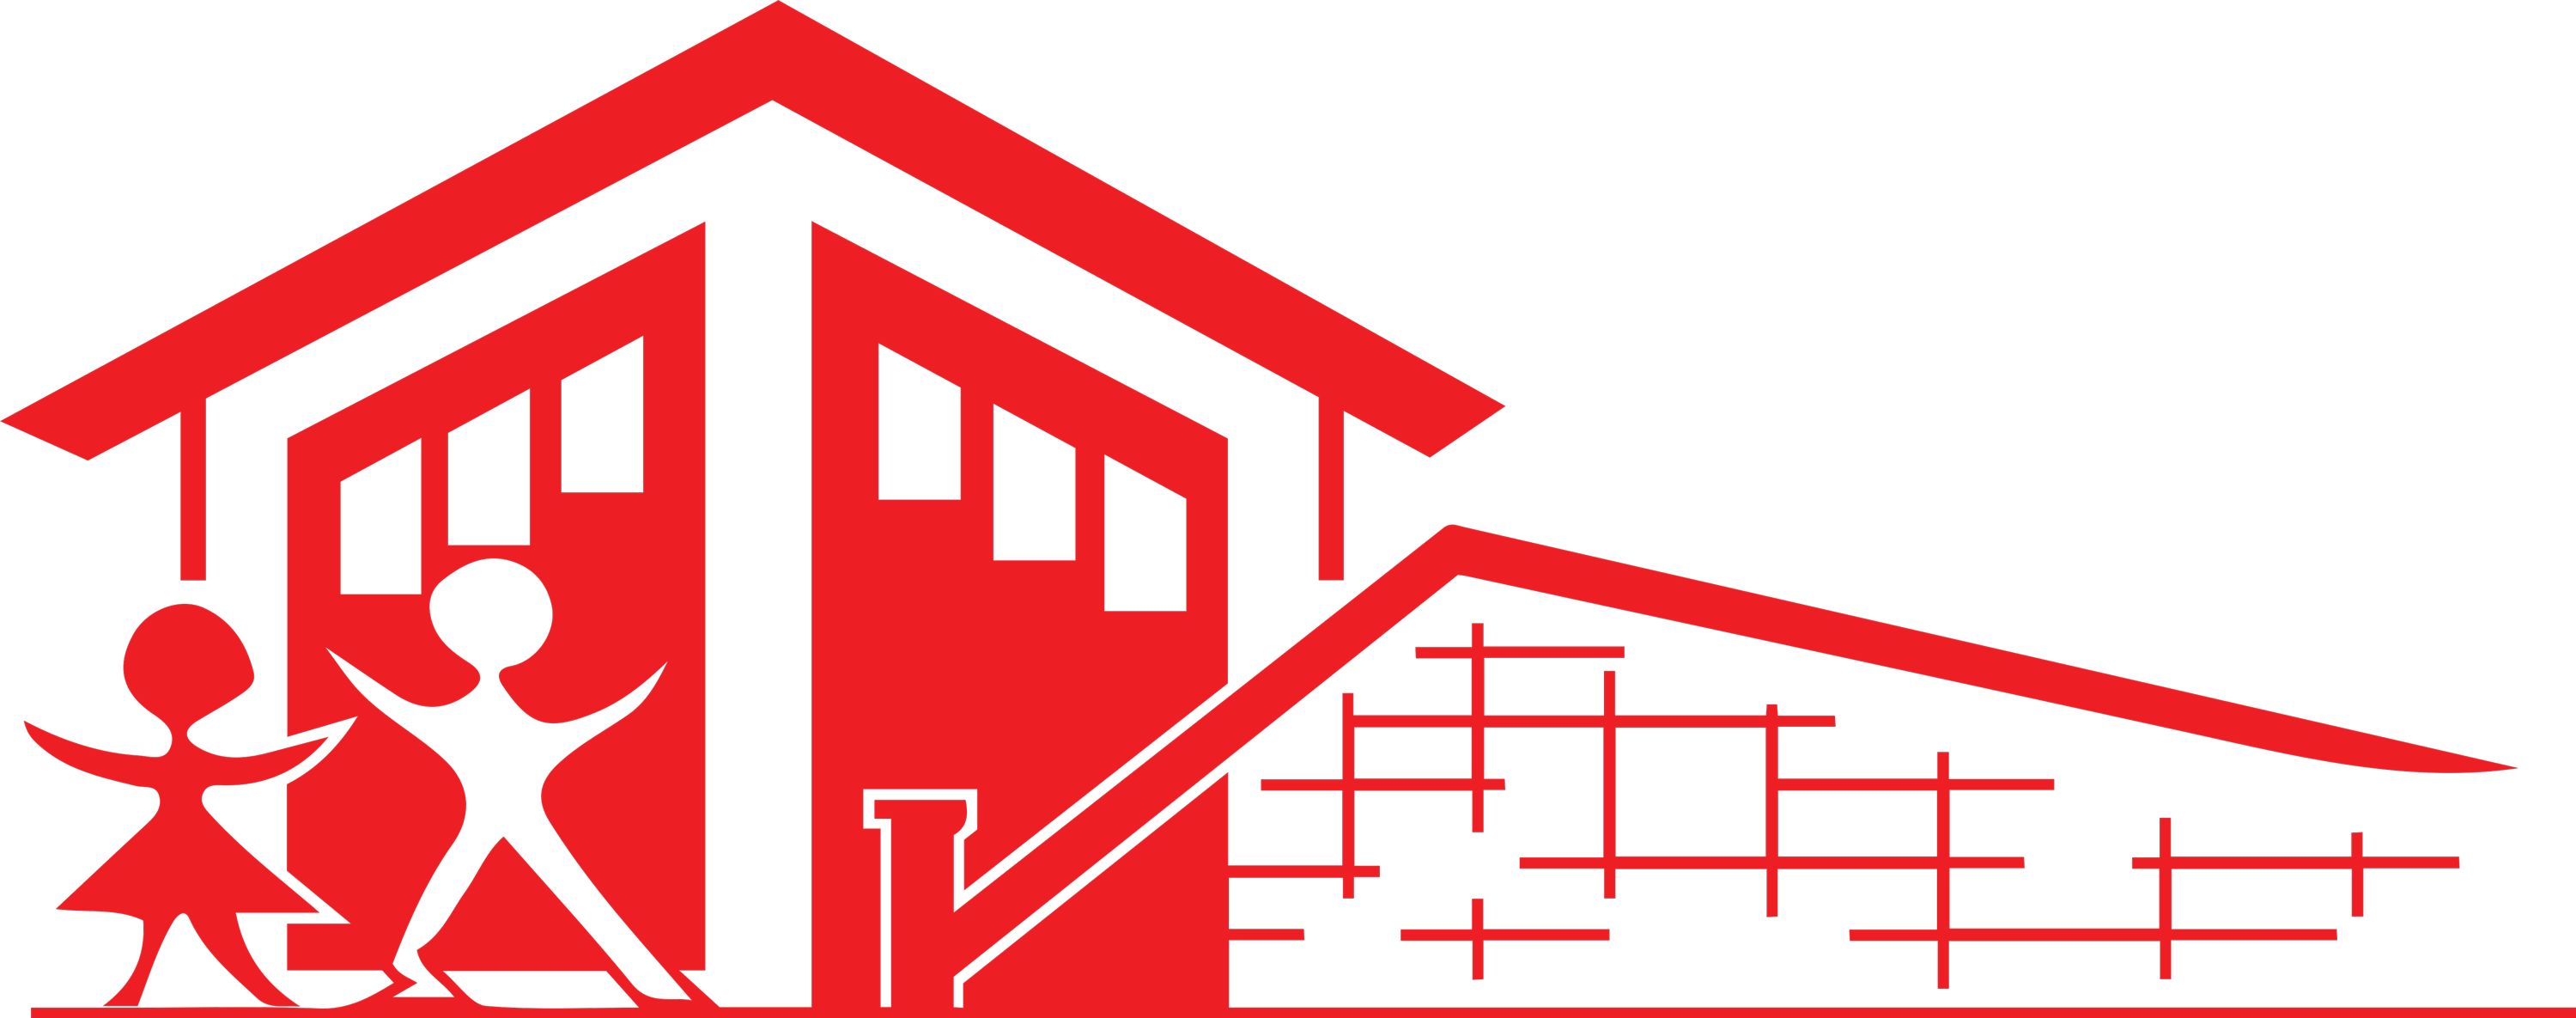 Fire Department Station House Vector (3000x1185)